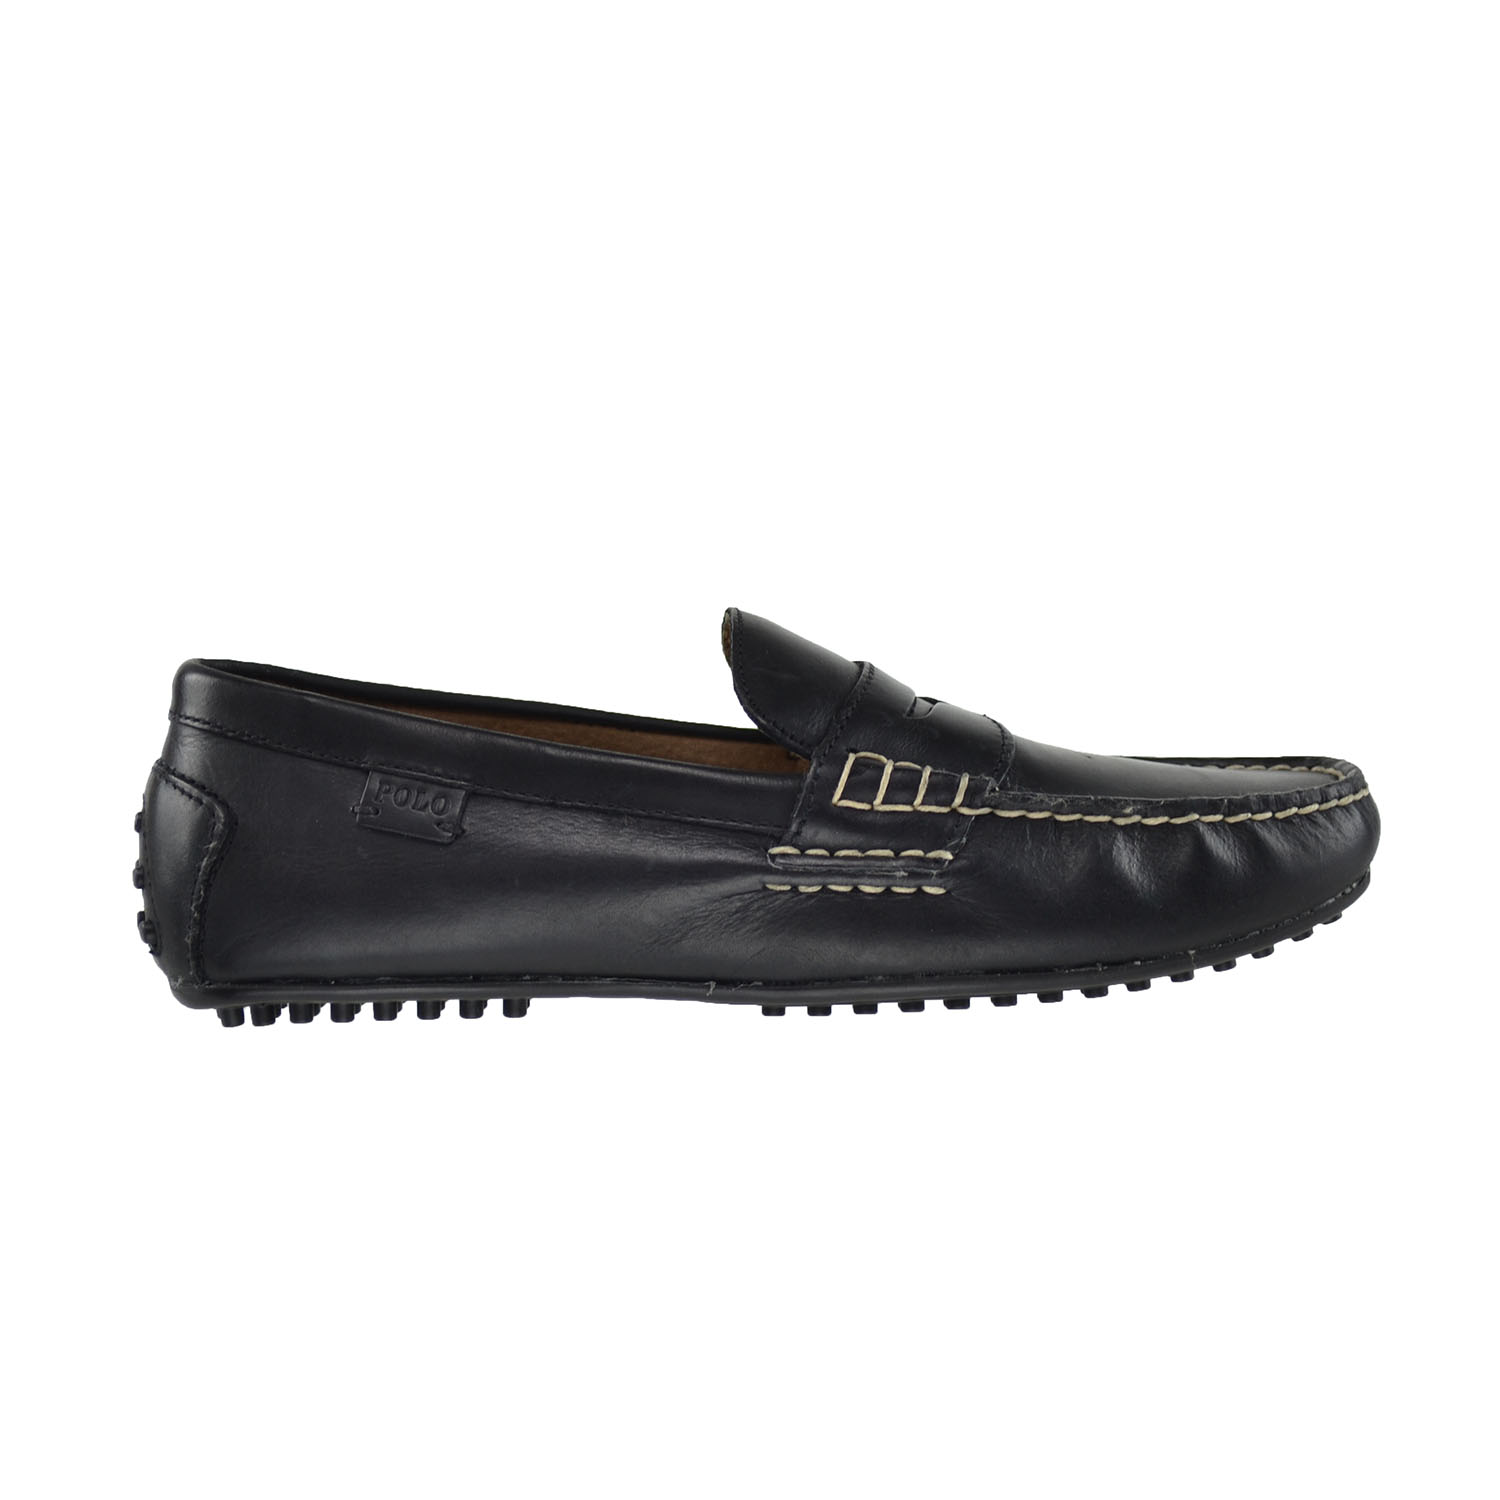 Polo Ralph Lauren Wes Smooth Pull Up Men's Loafers Black 803200174-001 - image 1 of 6